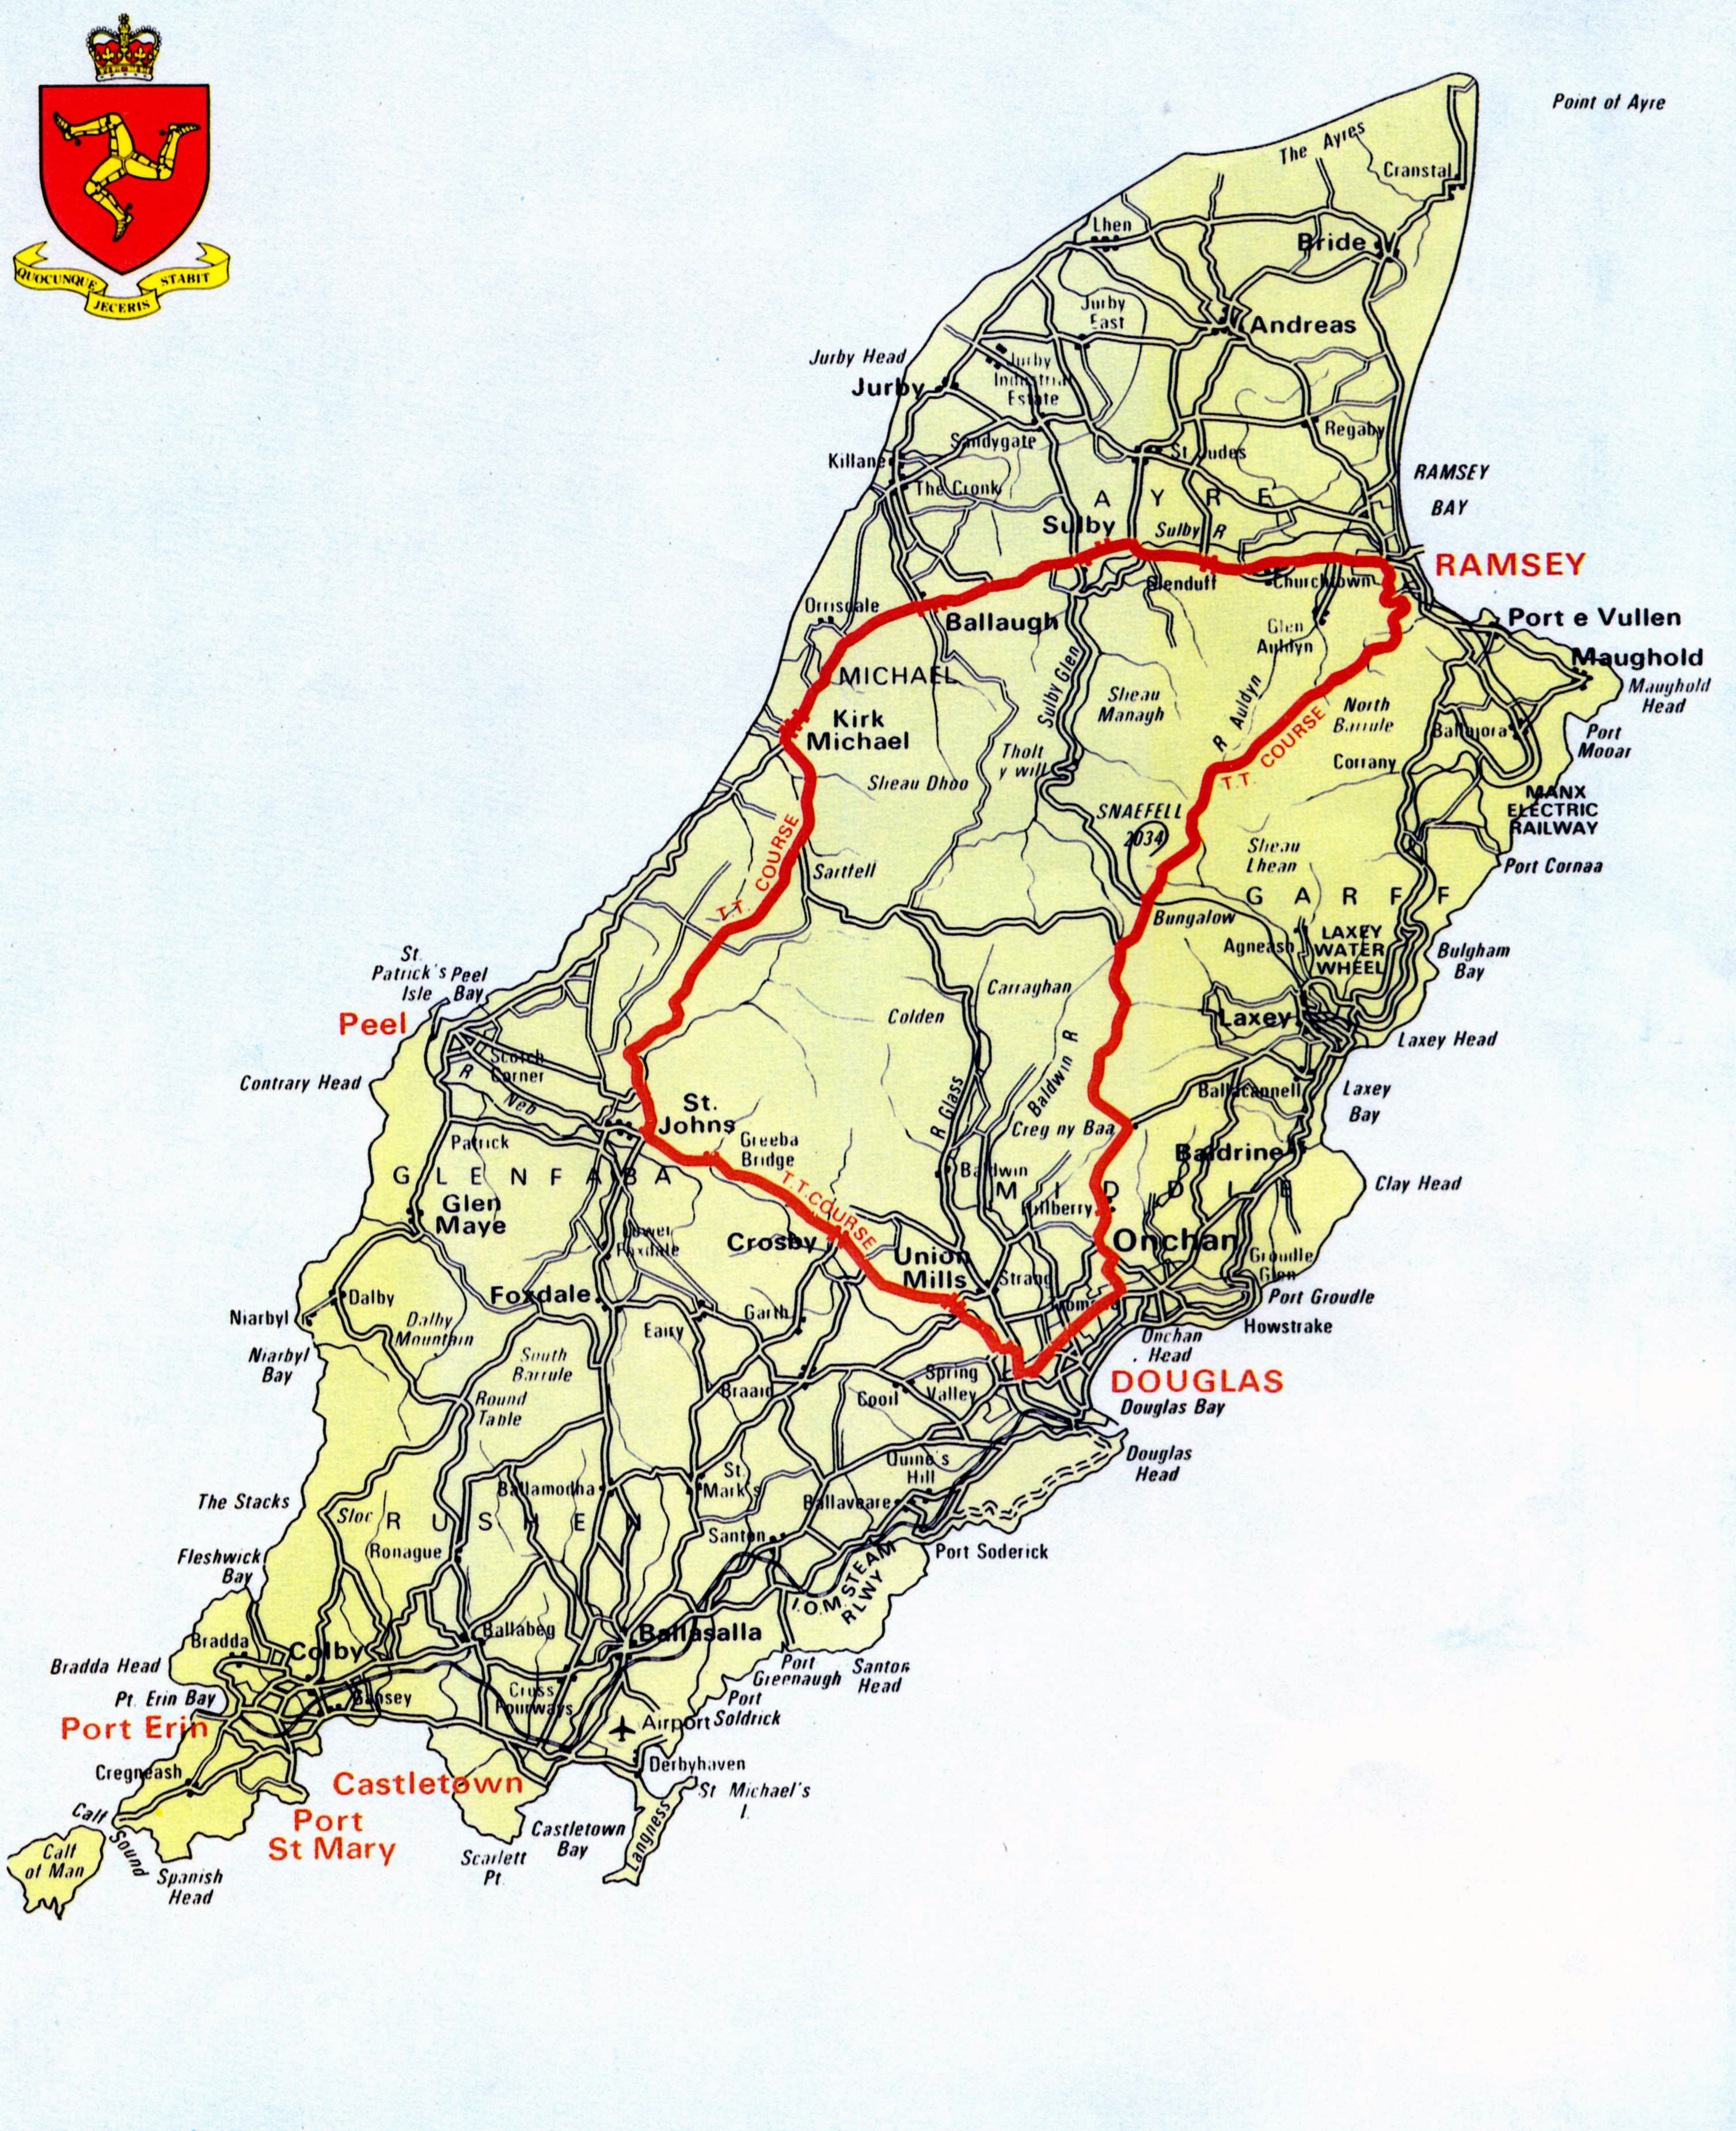 map of isle of man Large Scale Road Map Of Isle Of Man Isle Of Man Europe map of isle of man